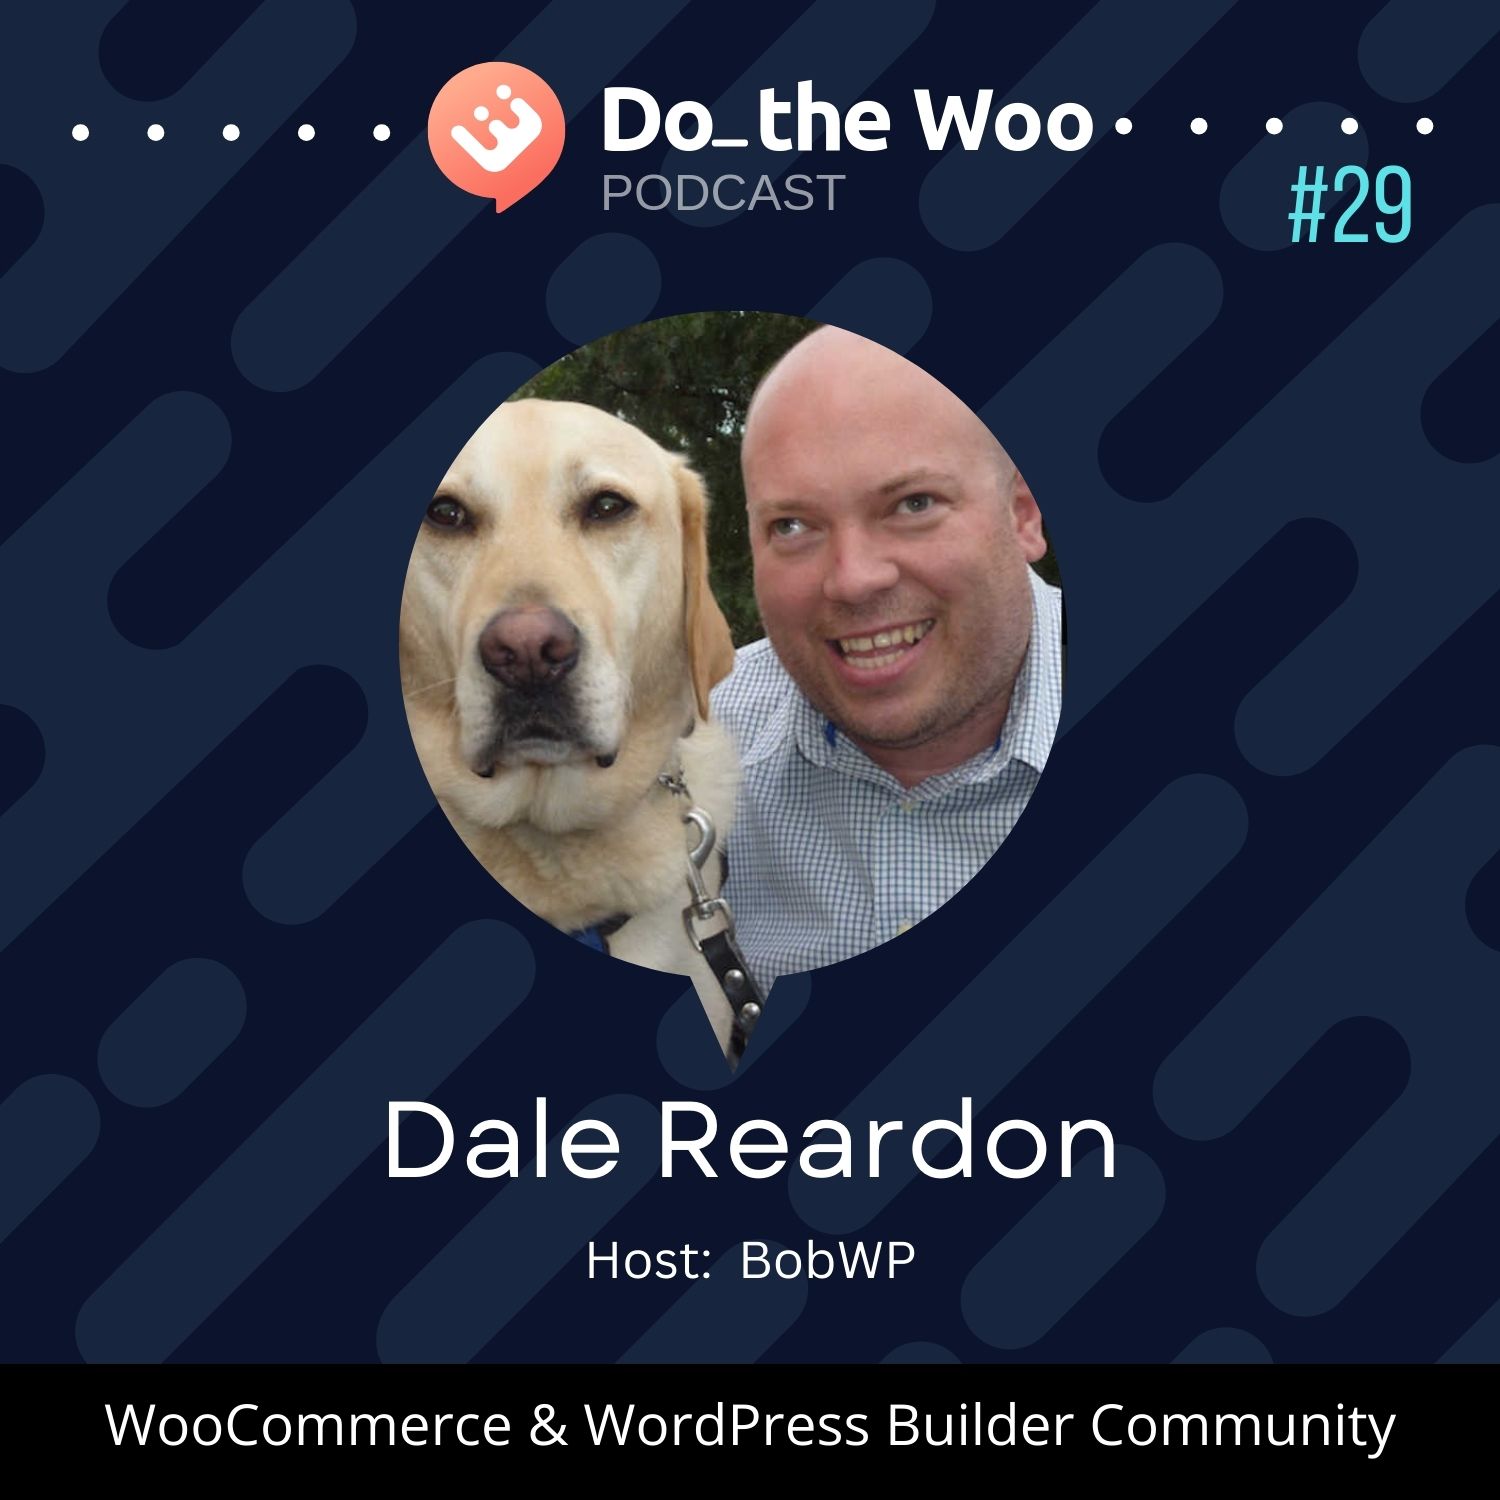 Travel, Accessibility and WooCommerce with Dale Reardon